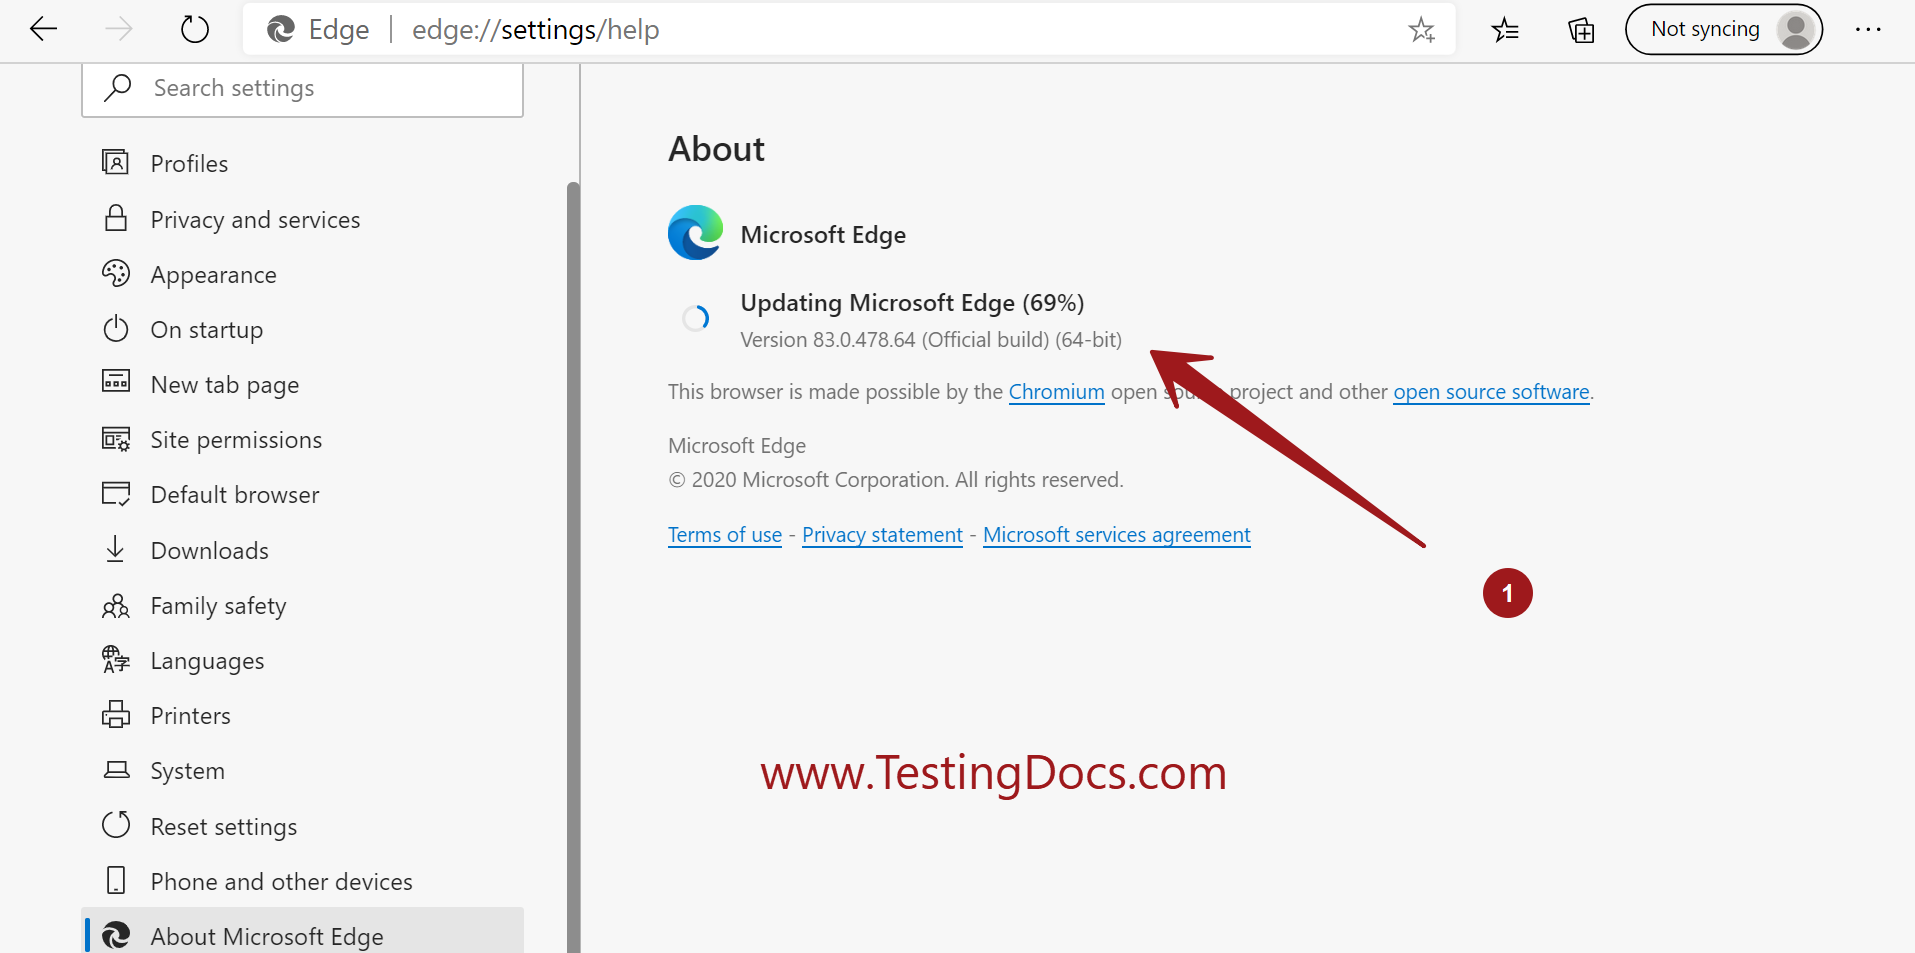 how to contact microsoft edge home page